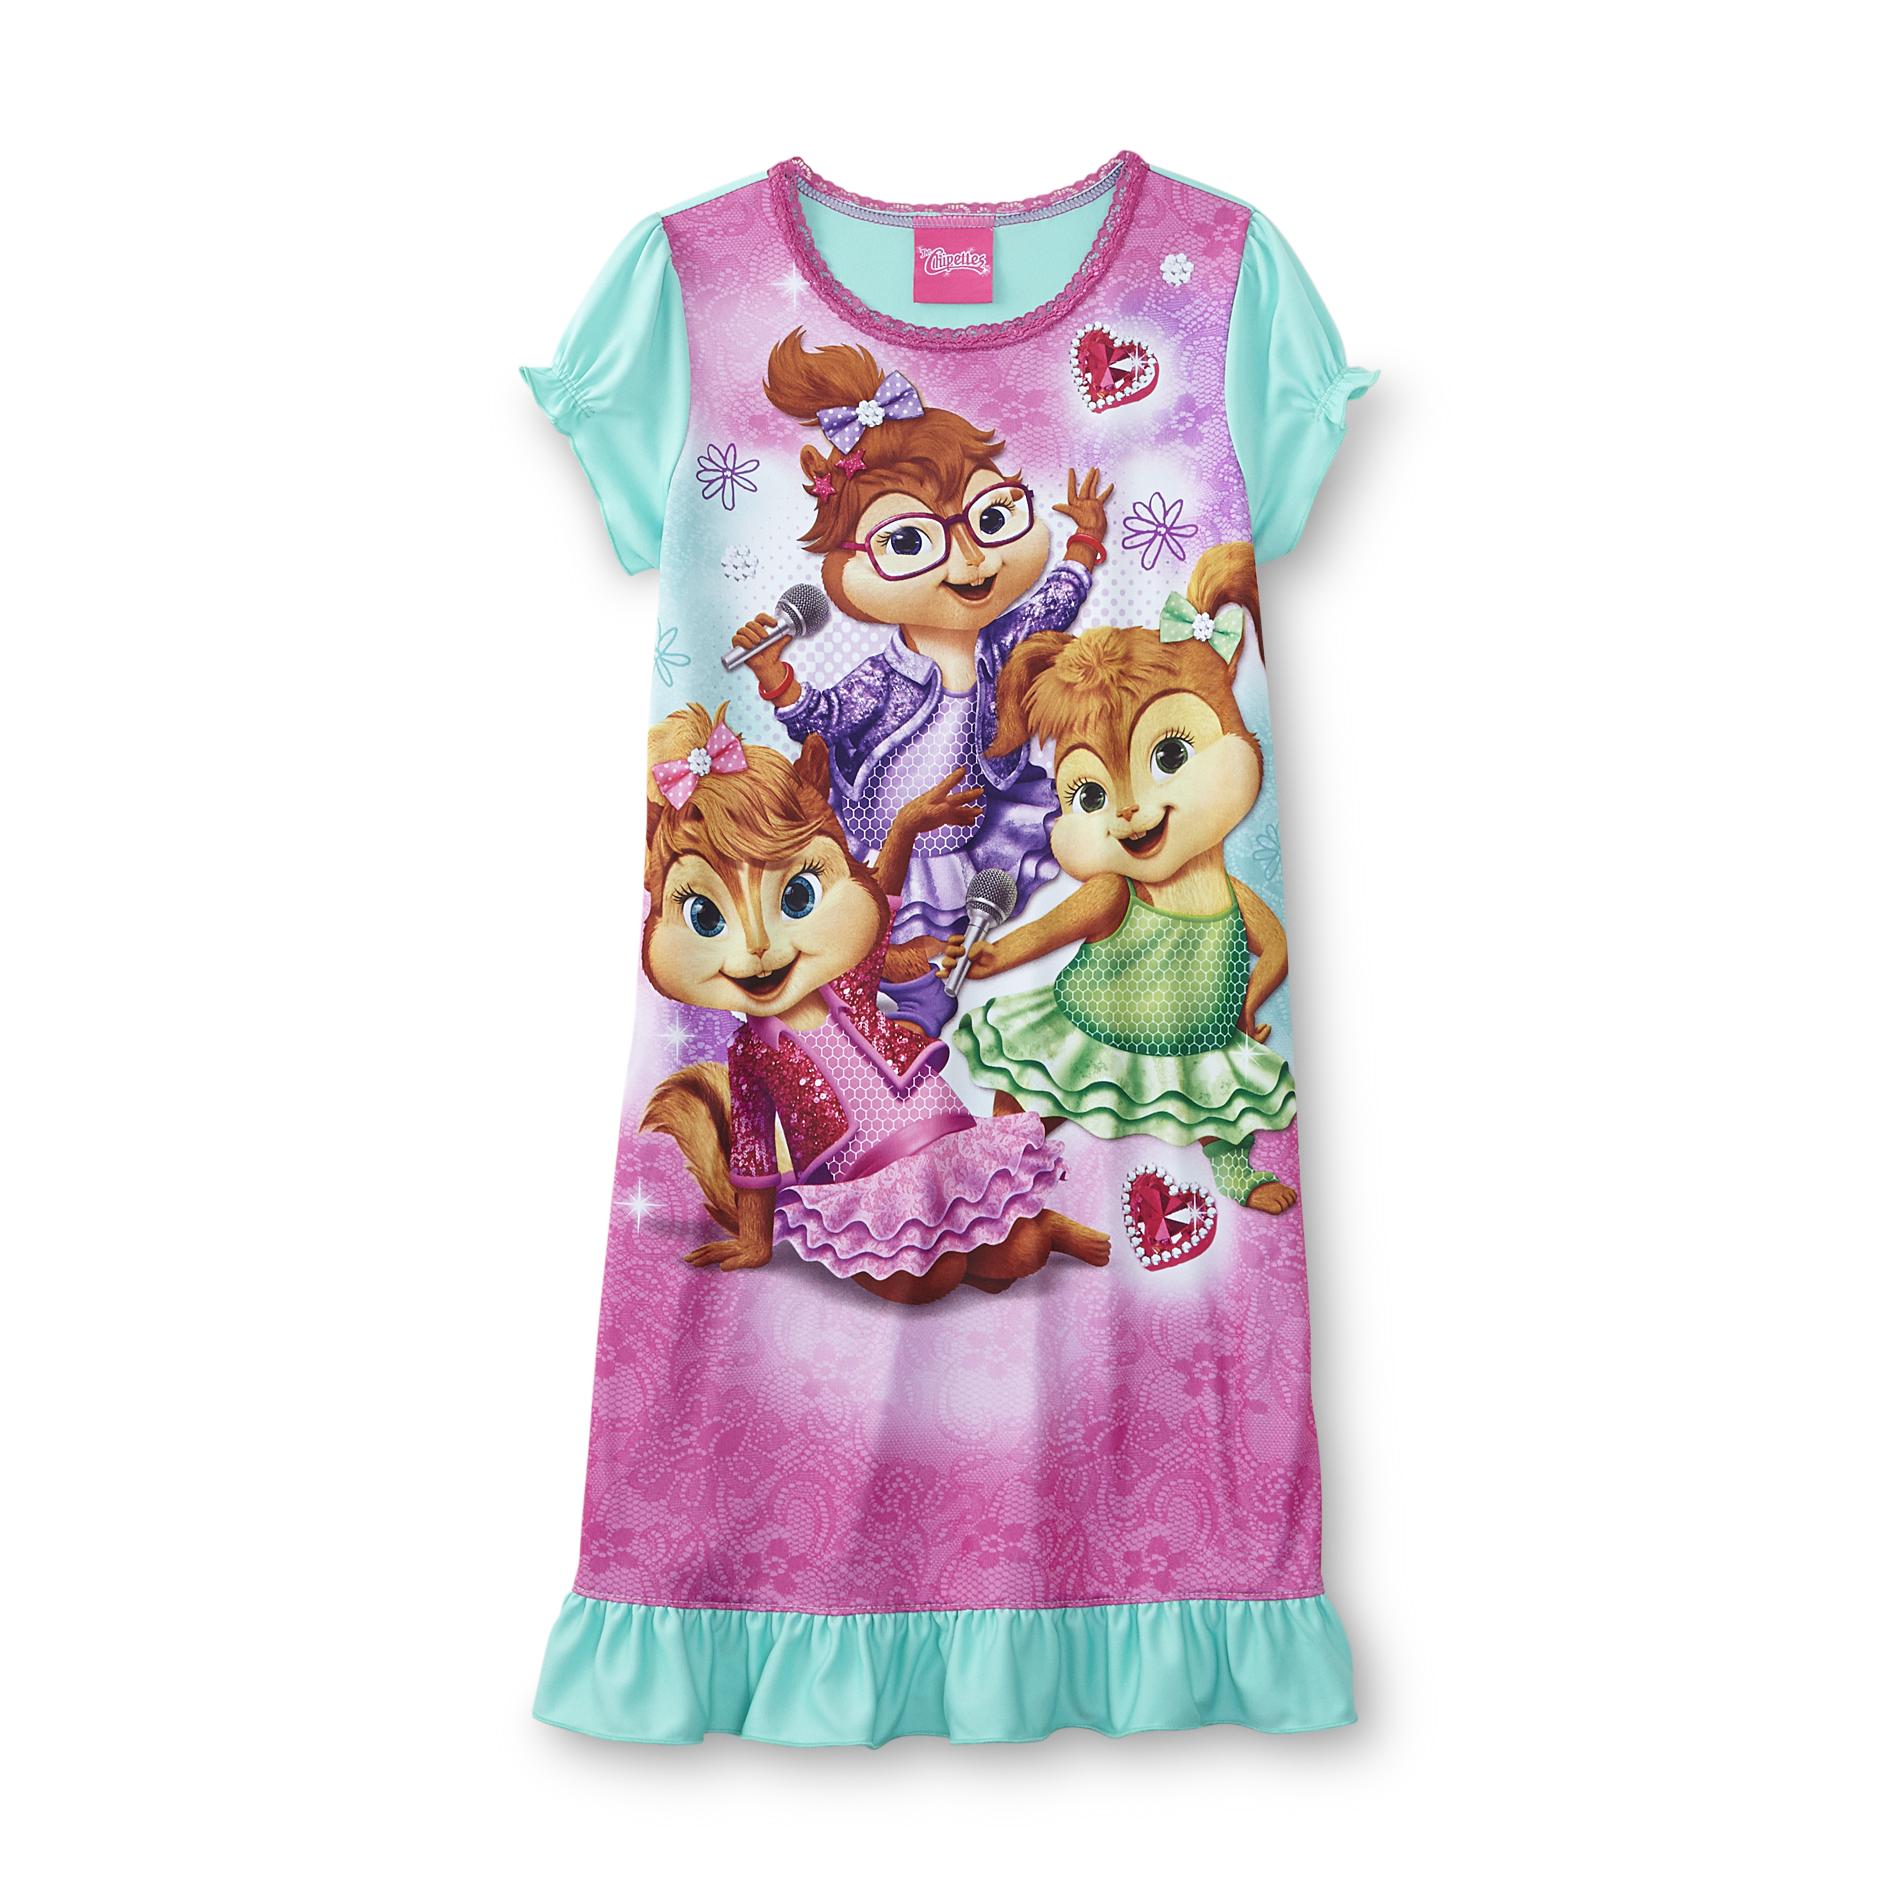 Chipettes Girl's Nightgown